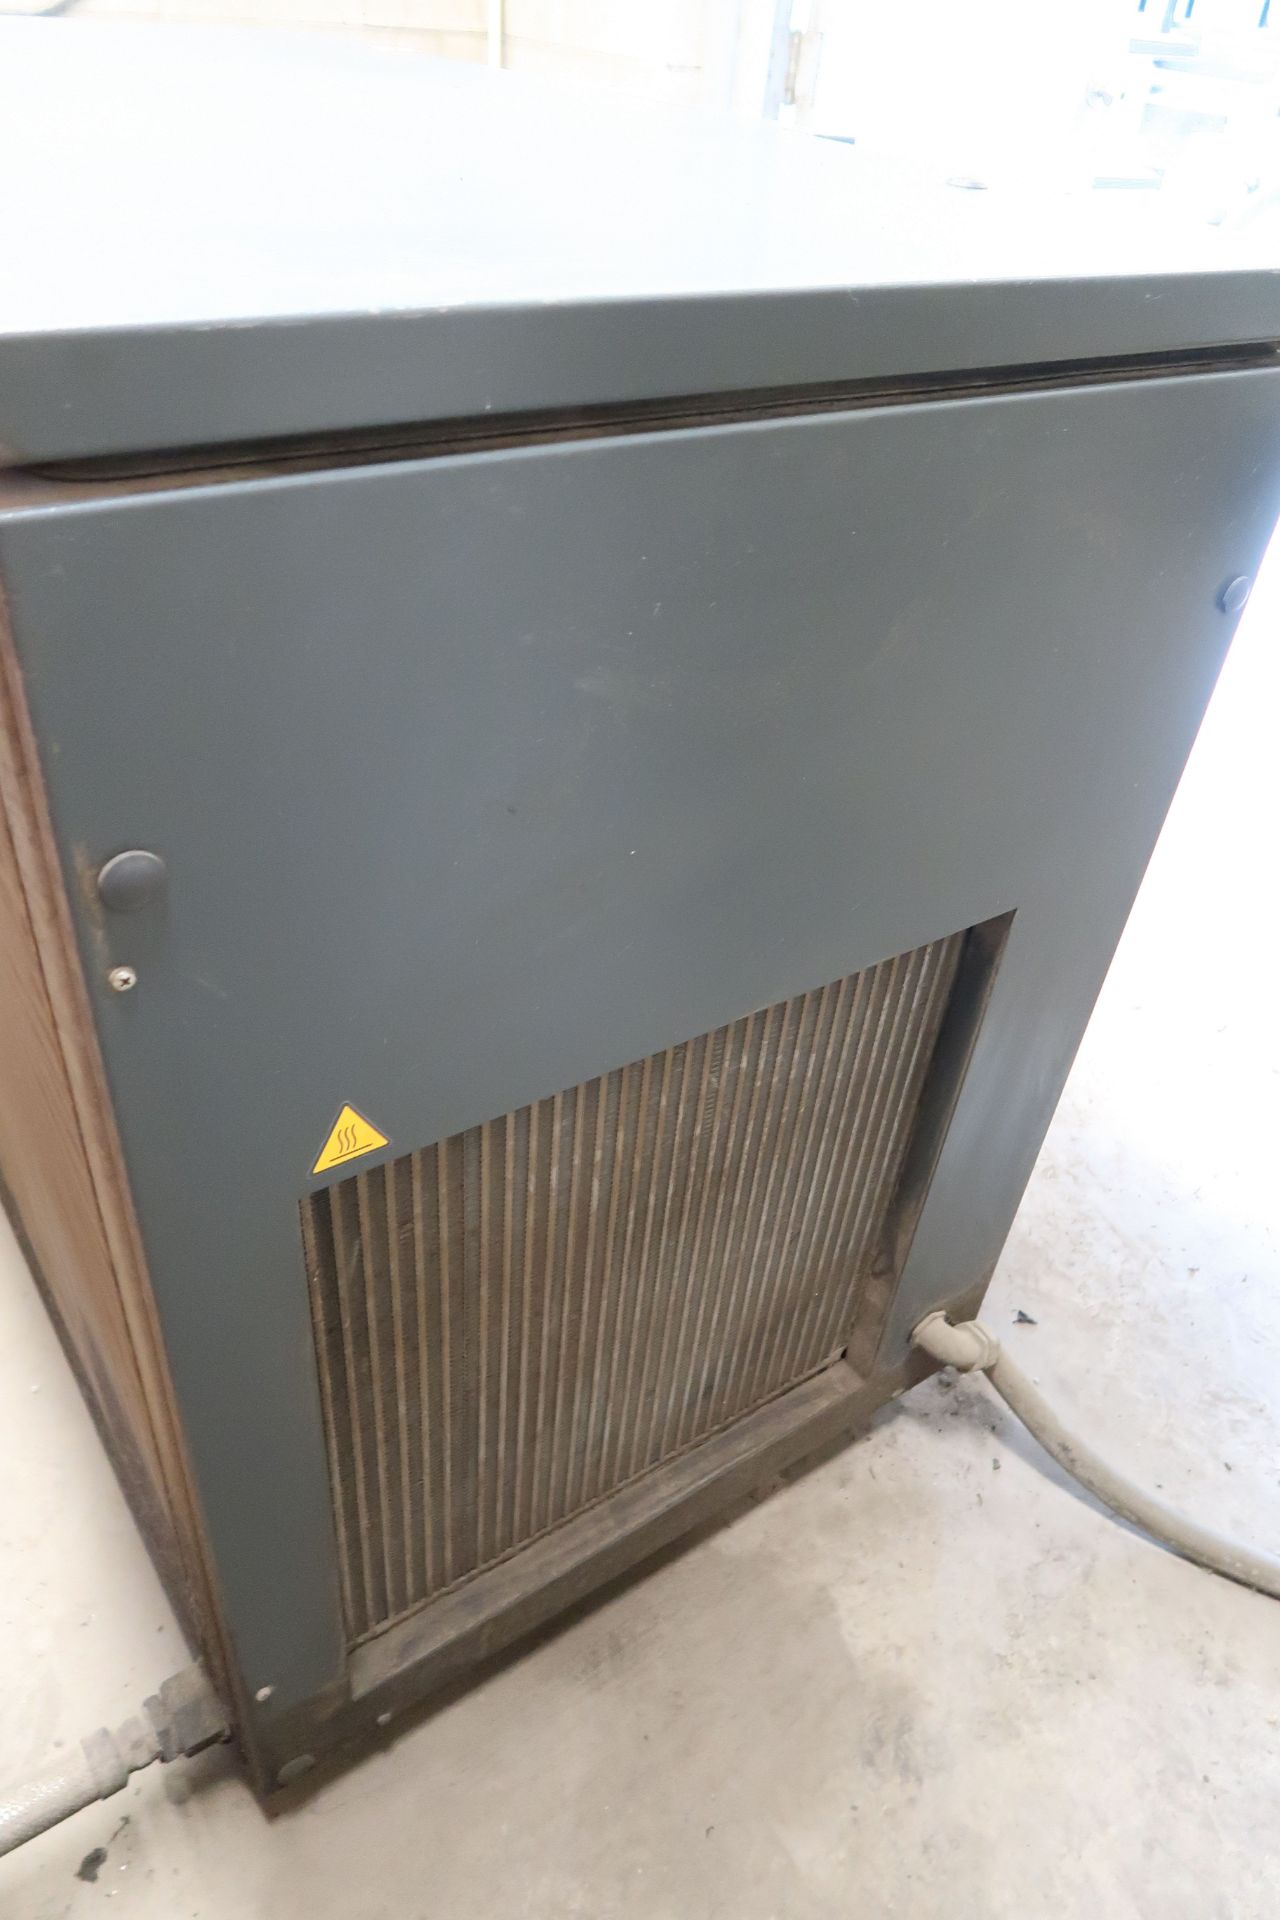 30 HP KAESER MODEL AS36 ROTARY SCREW CABINET ENCLOSED AIR COMPRESSOR; S/N 3611123, 49,860 HOURS - Image 4 of 9